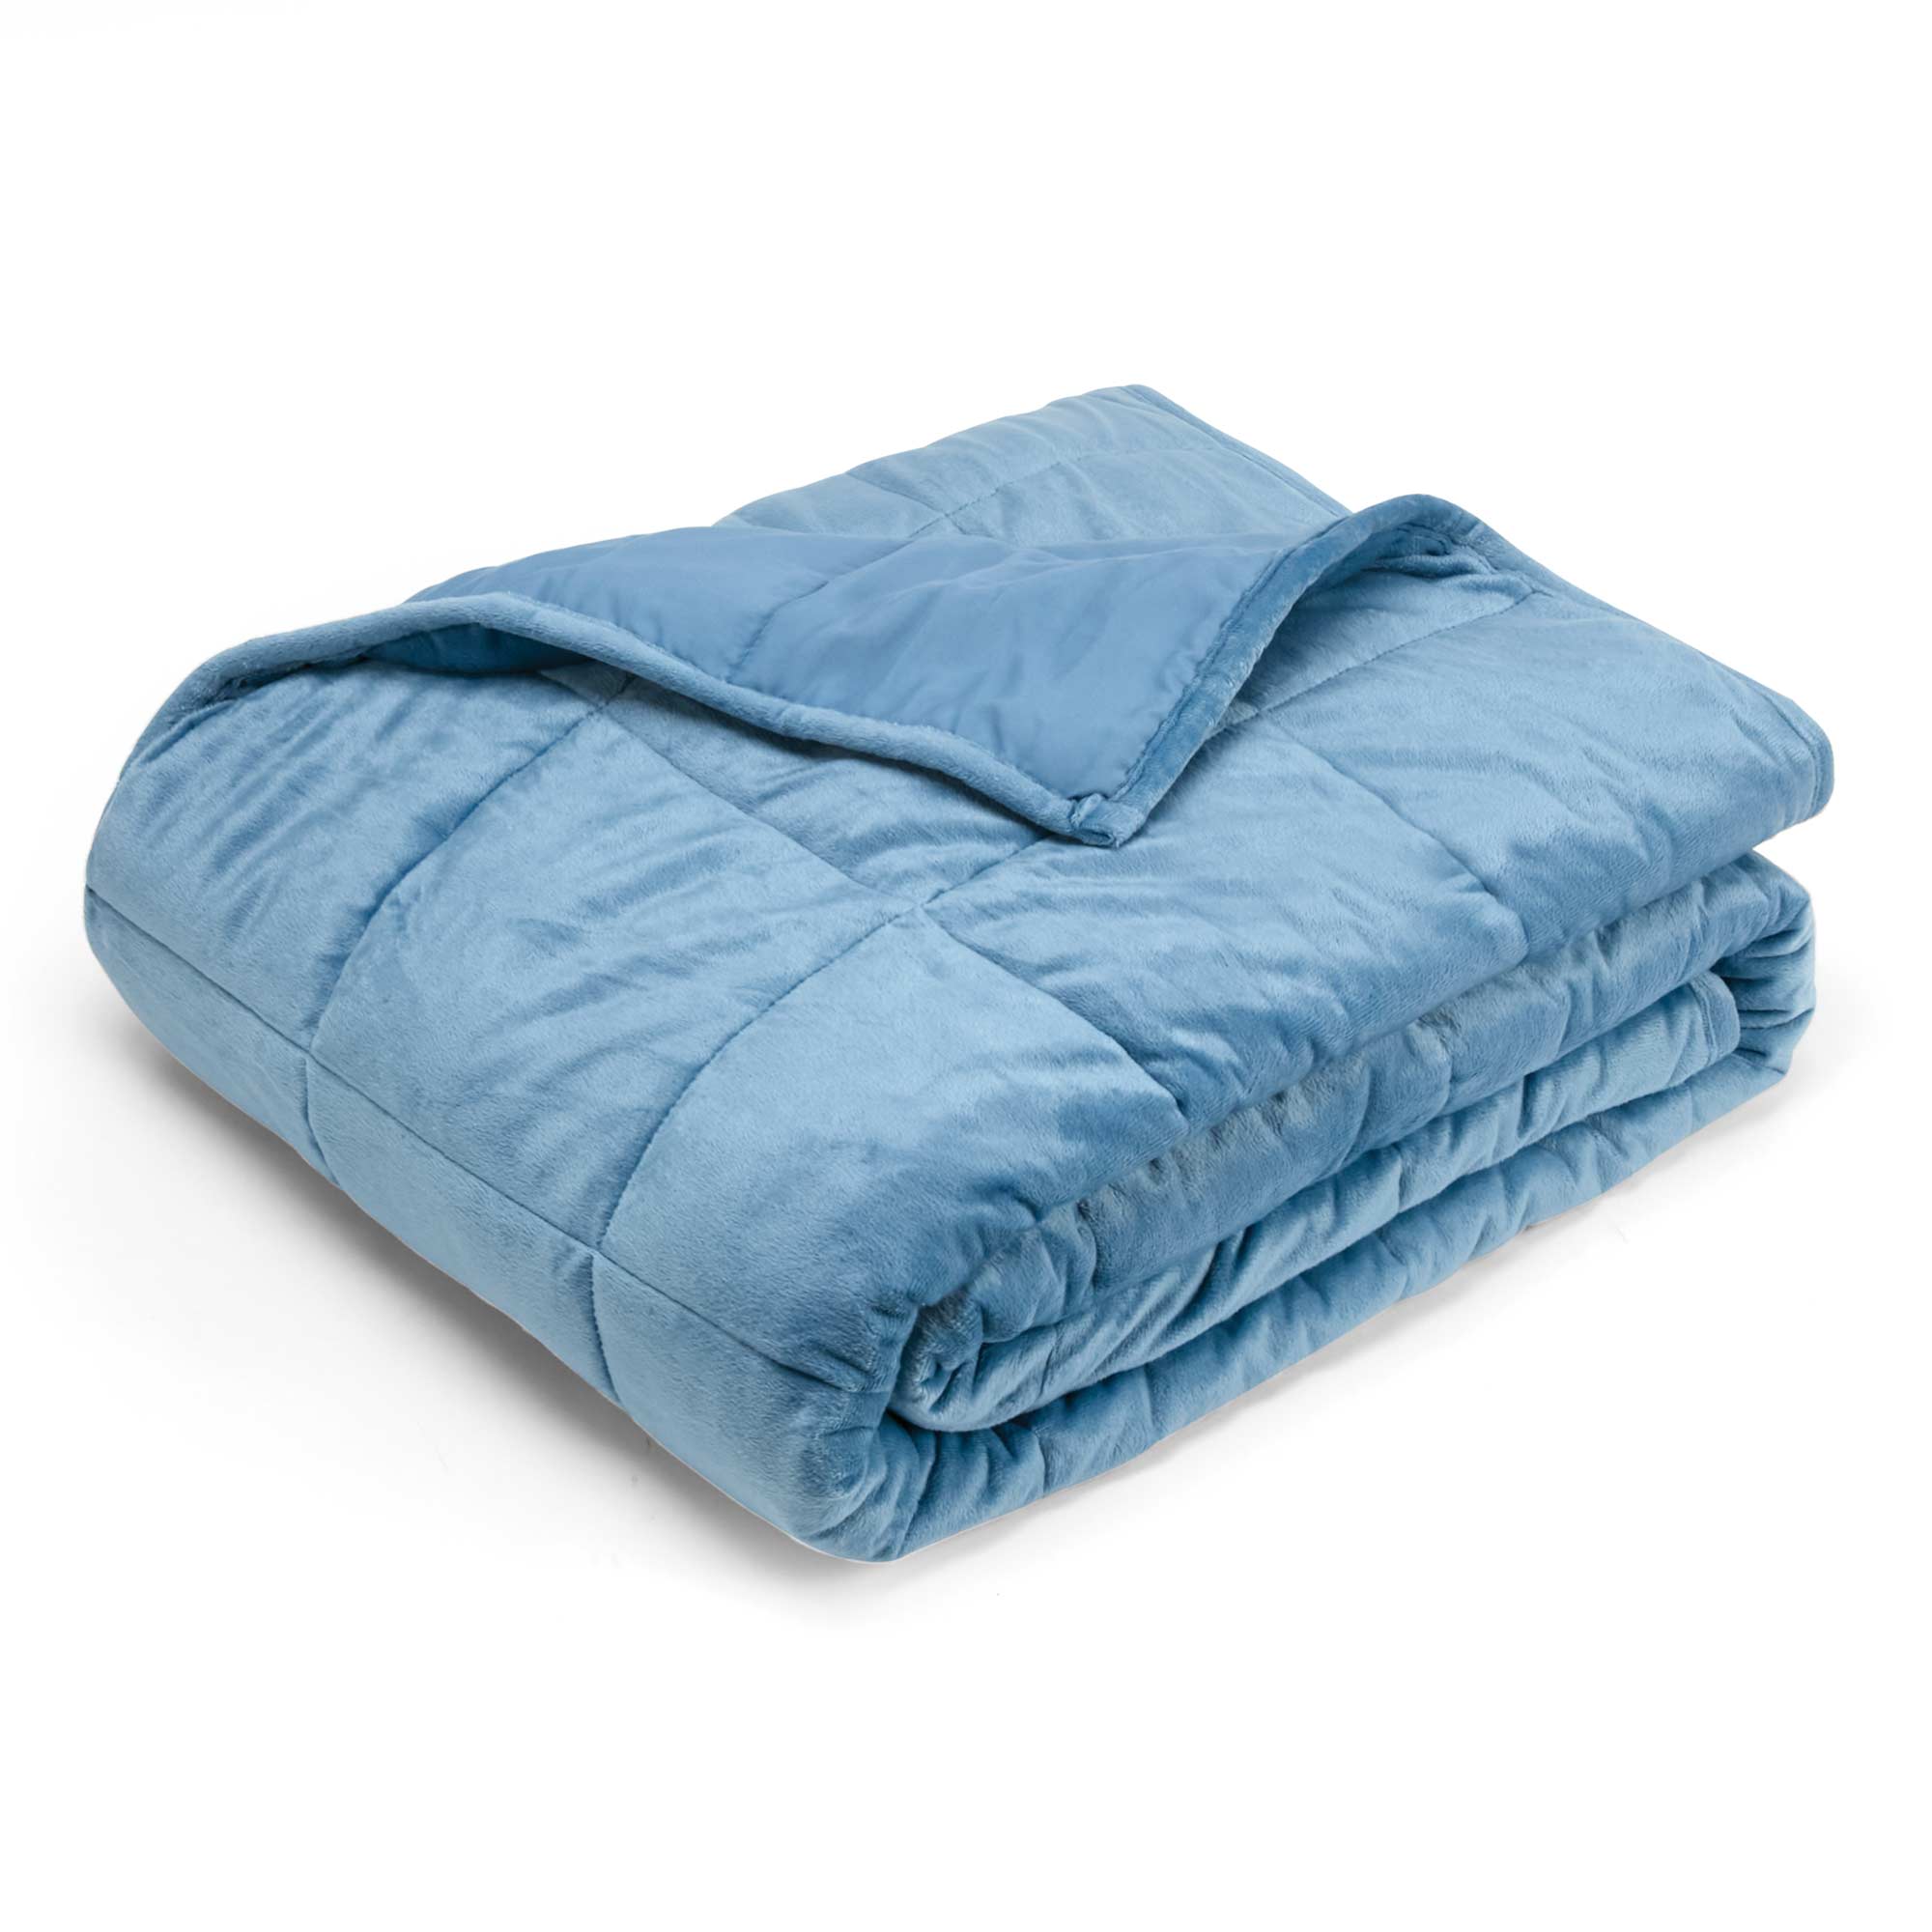 15-lb. Weighted Blanket - 48" x 72"